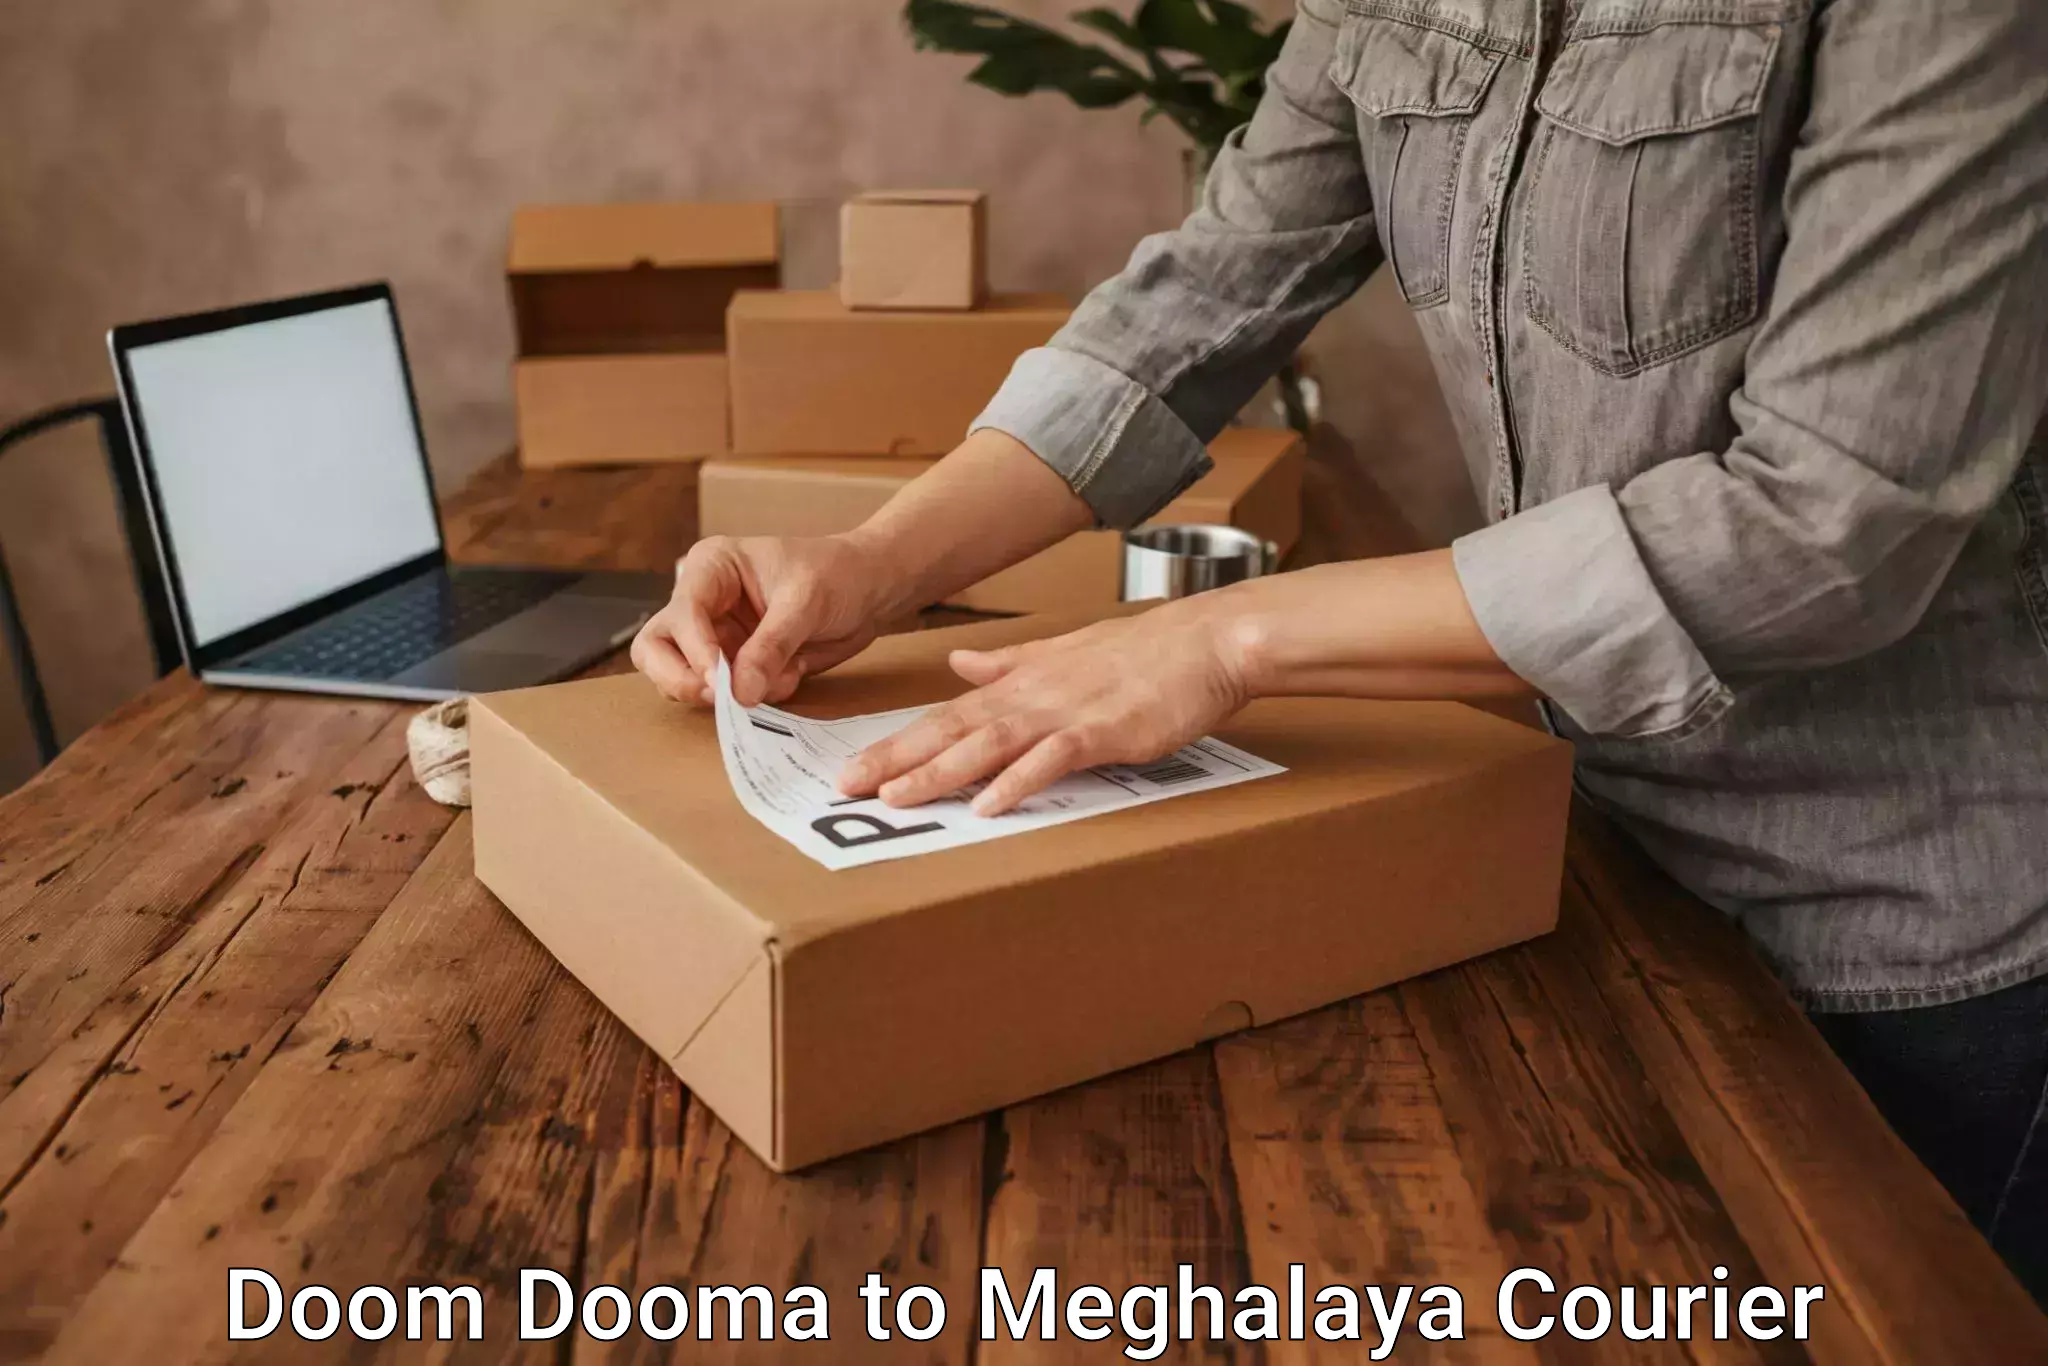 Round-the-clock parcel delivery Doom Dooma to Tura